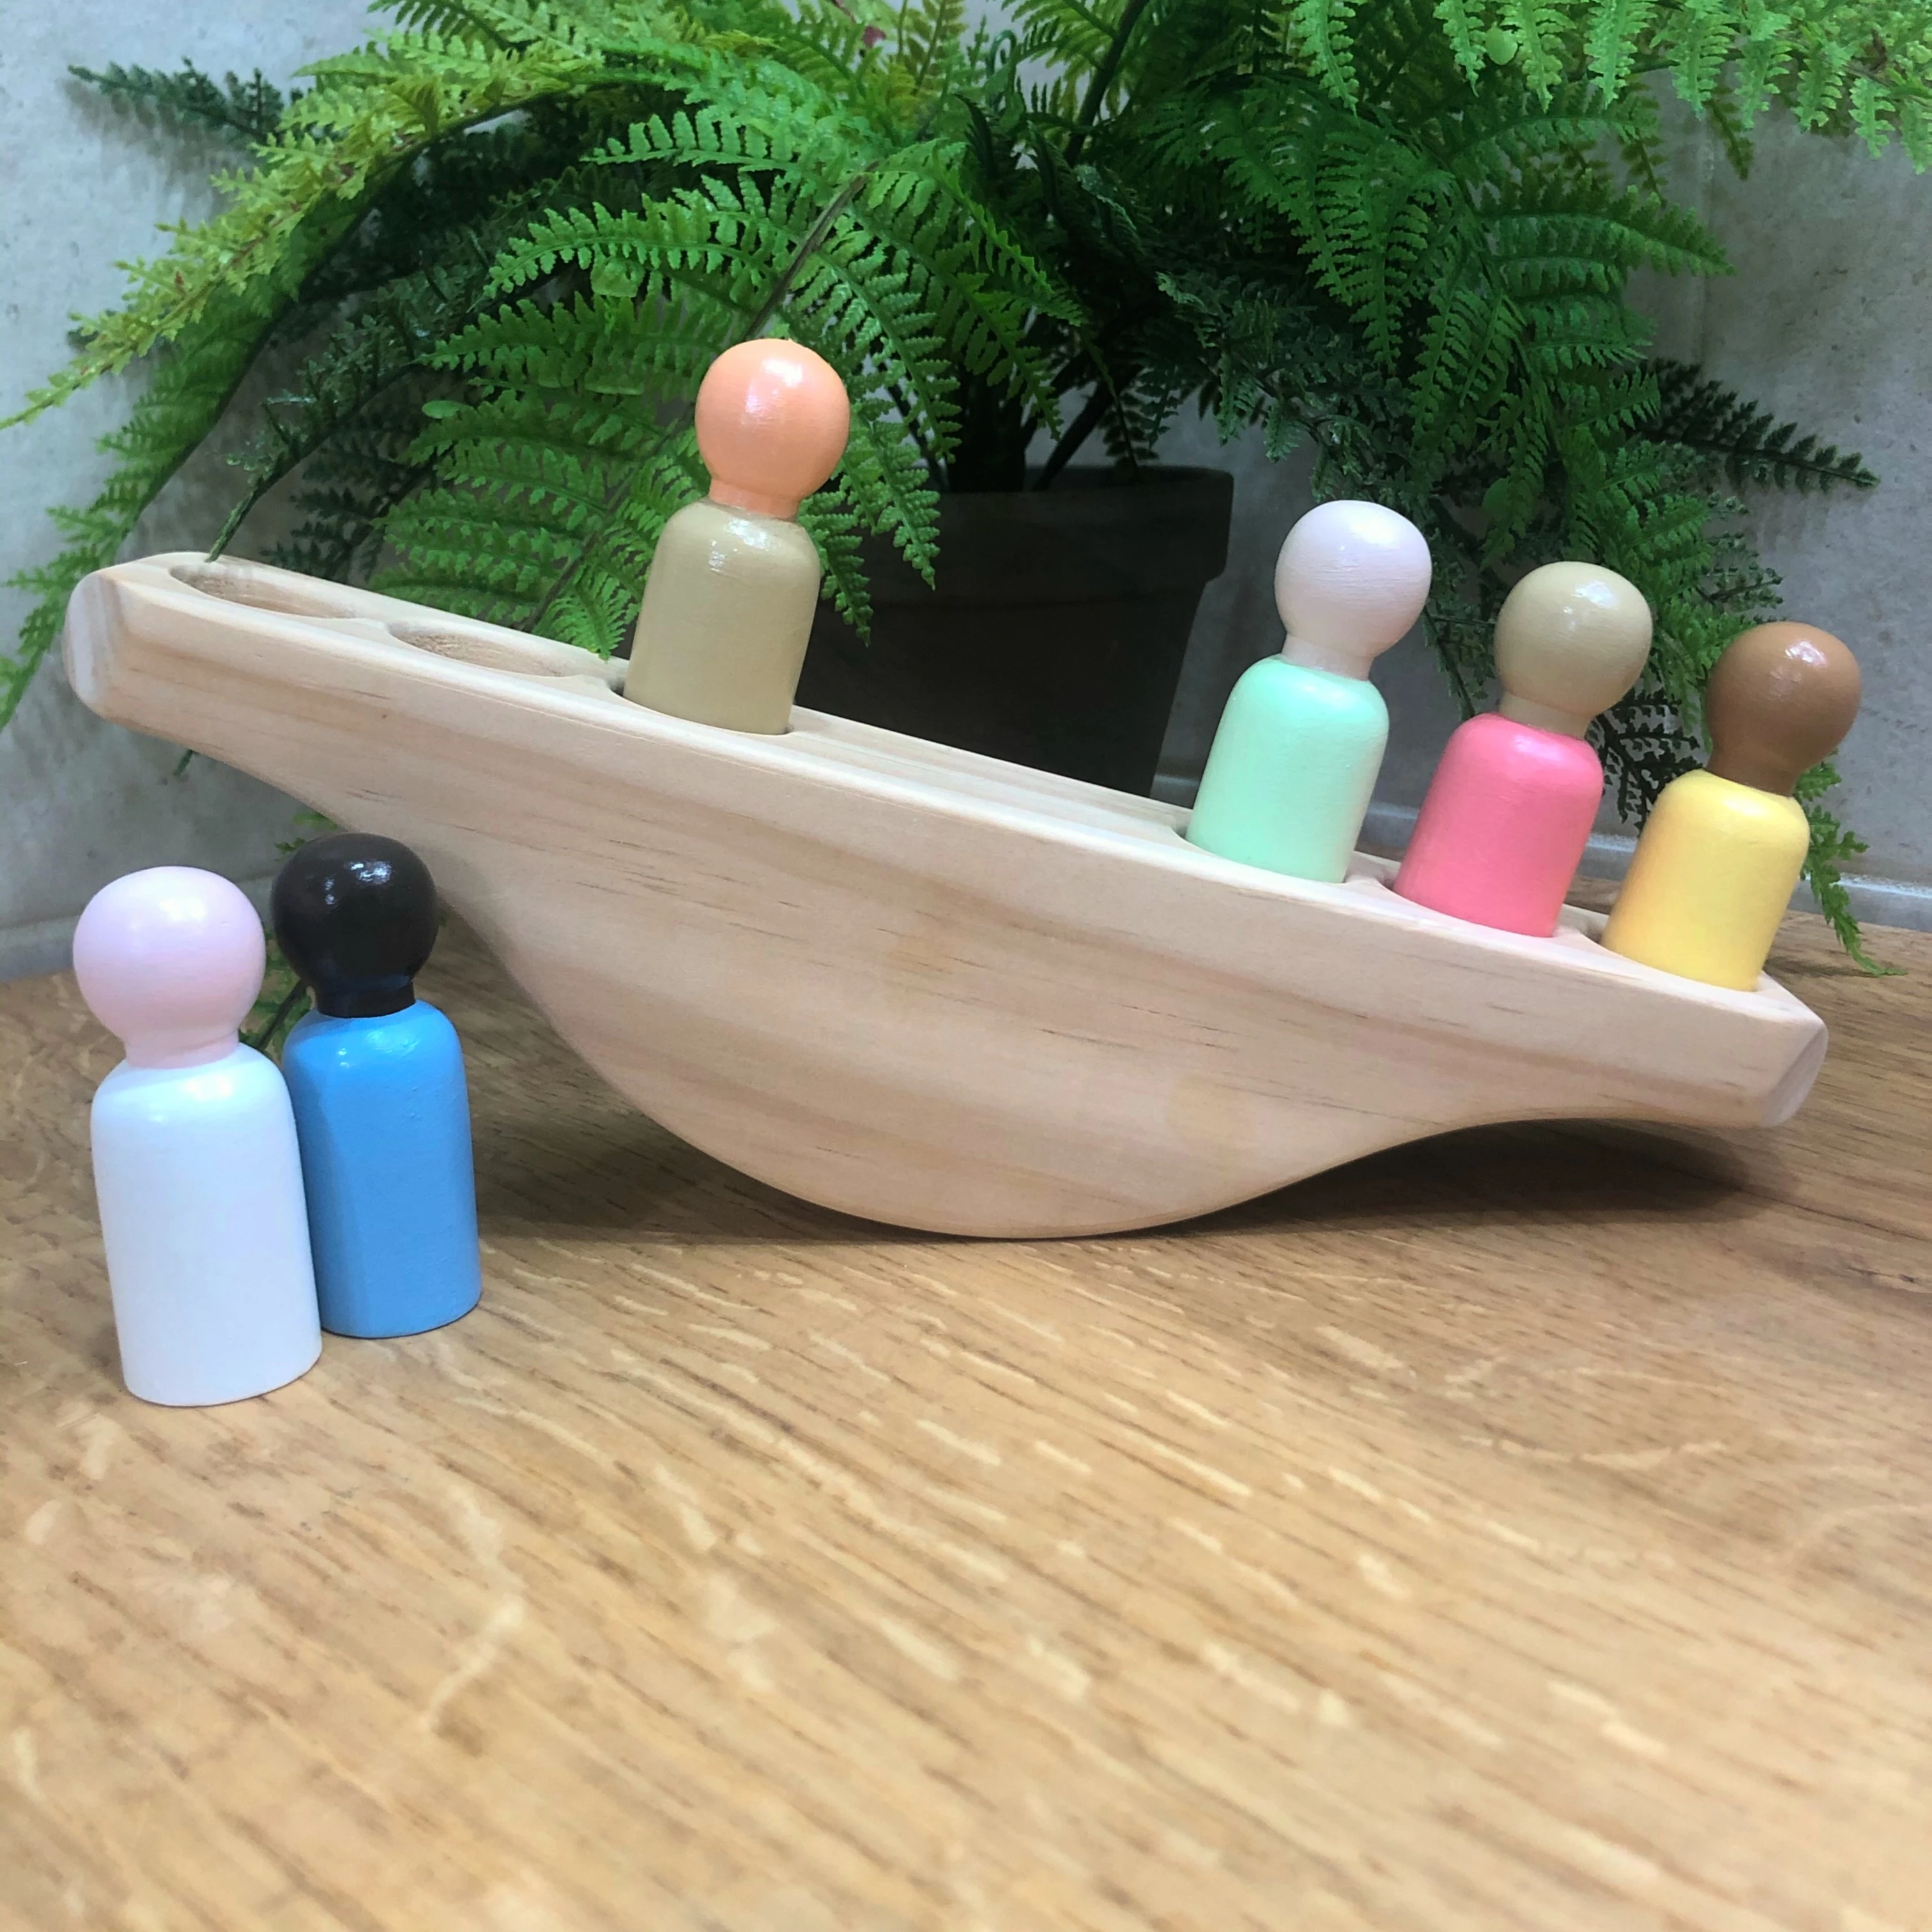 DIY Wood Crafts Educational Wooden Balancing Scale With 6 Peg Dolls Wooden Balancing Toy